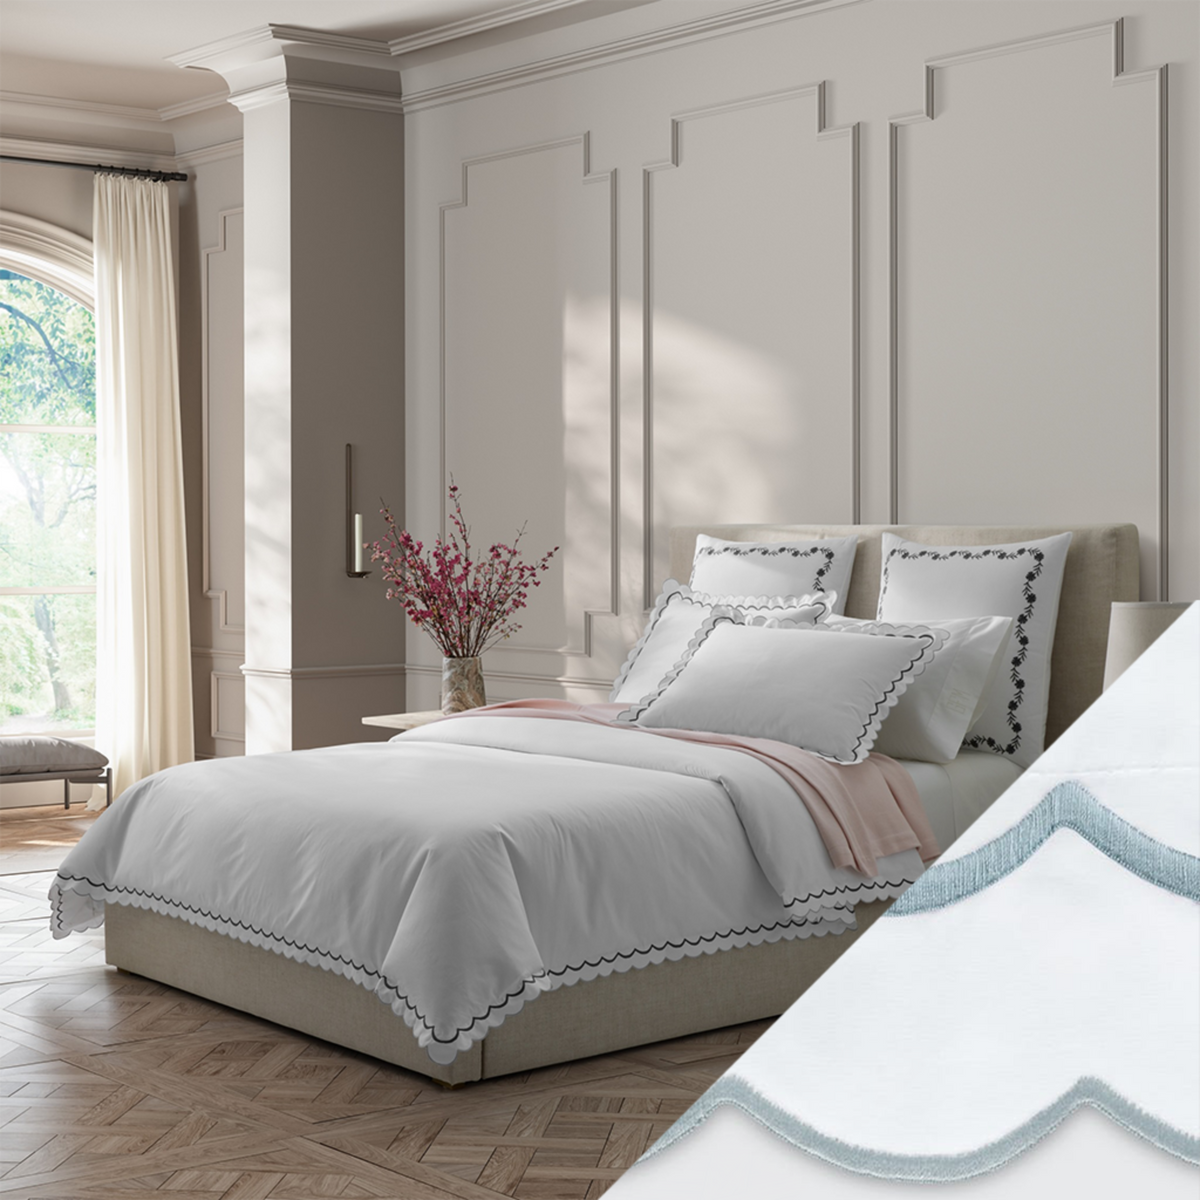 Full Bed Dressed in Matouk India Bedding in Charcoal Color with Pool Swatch